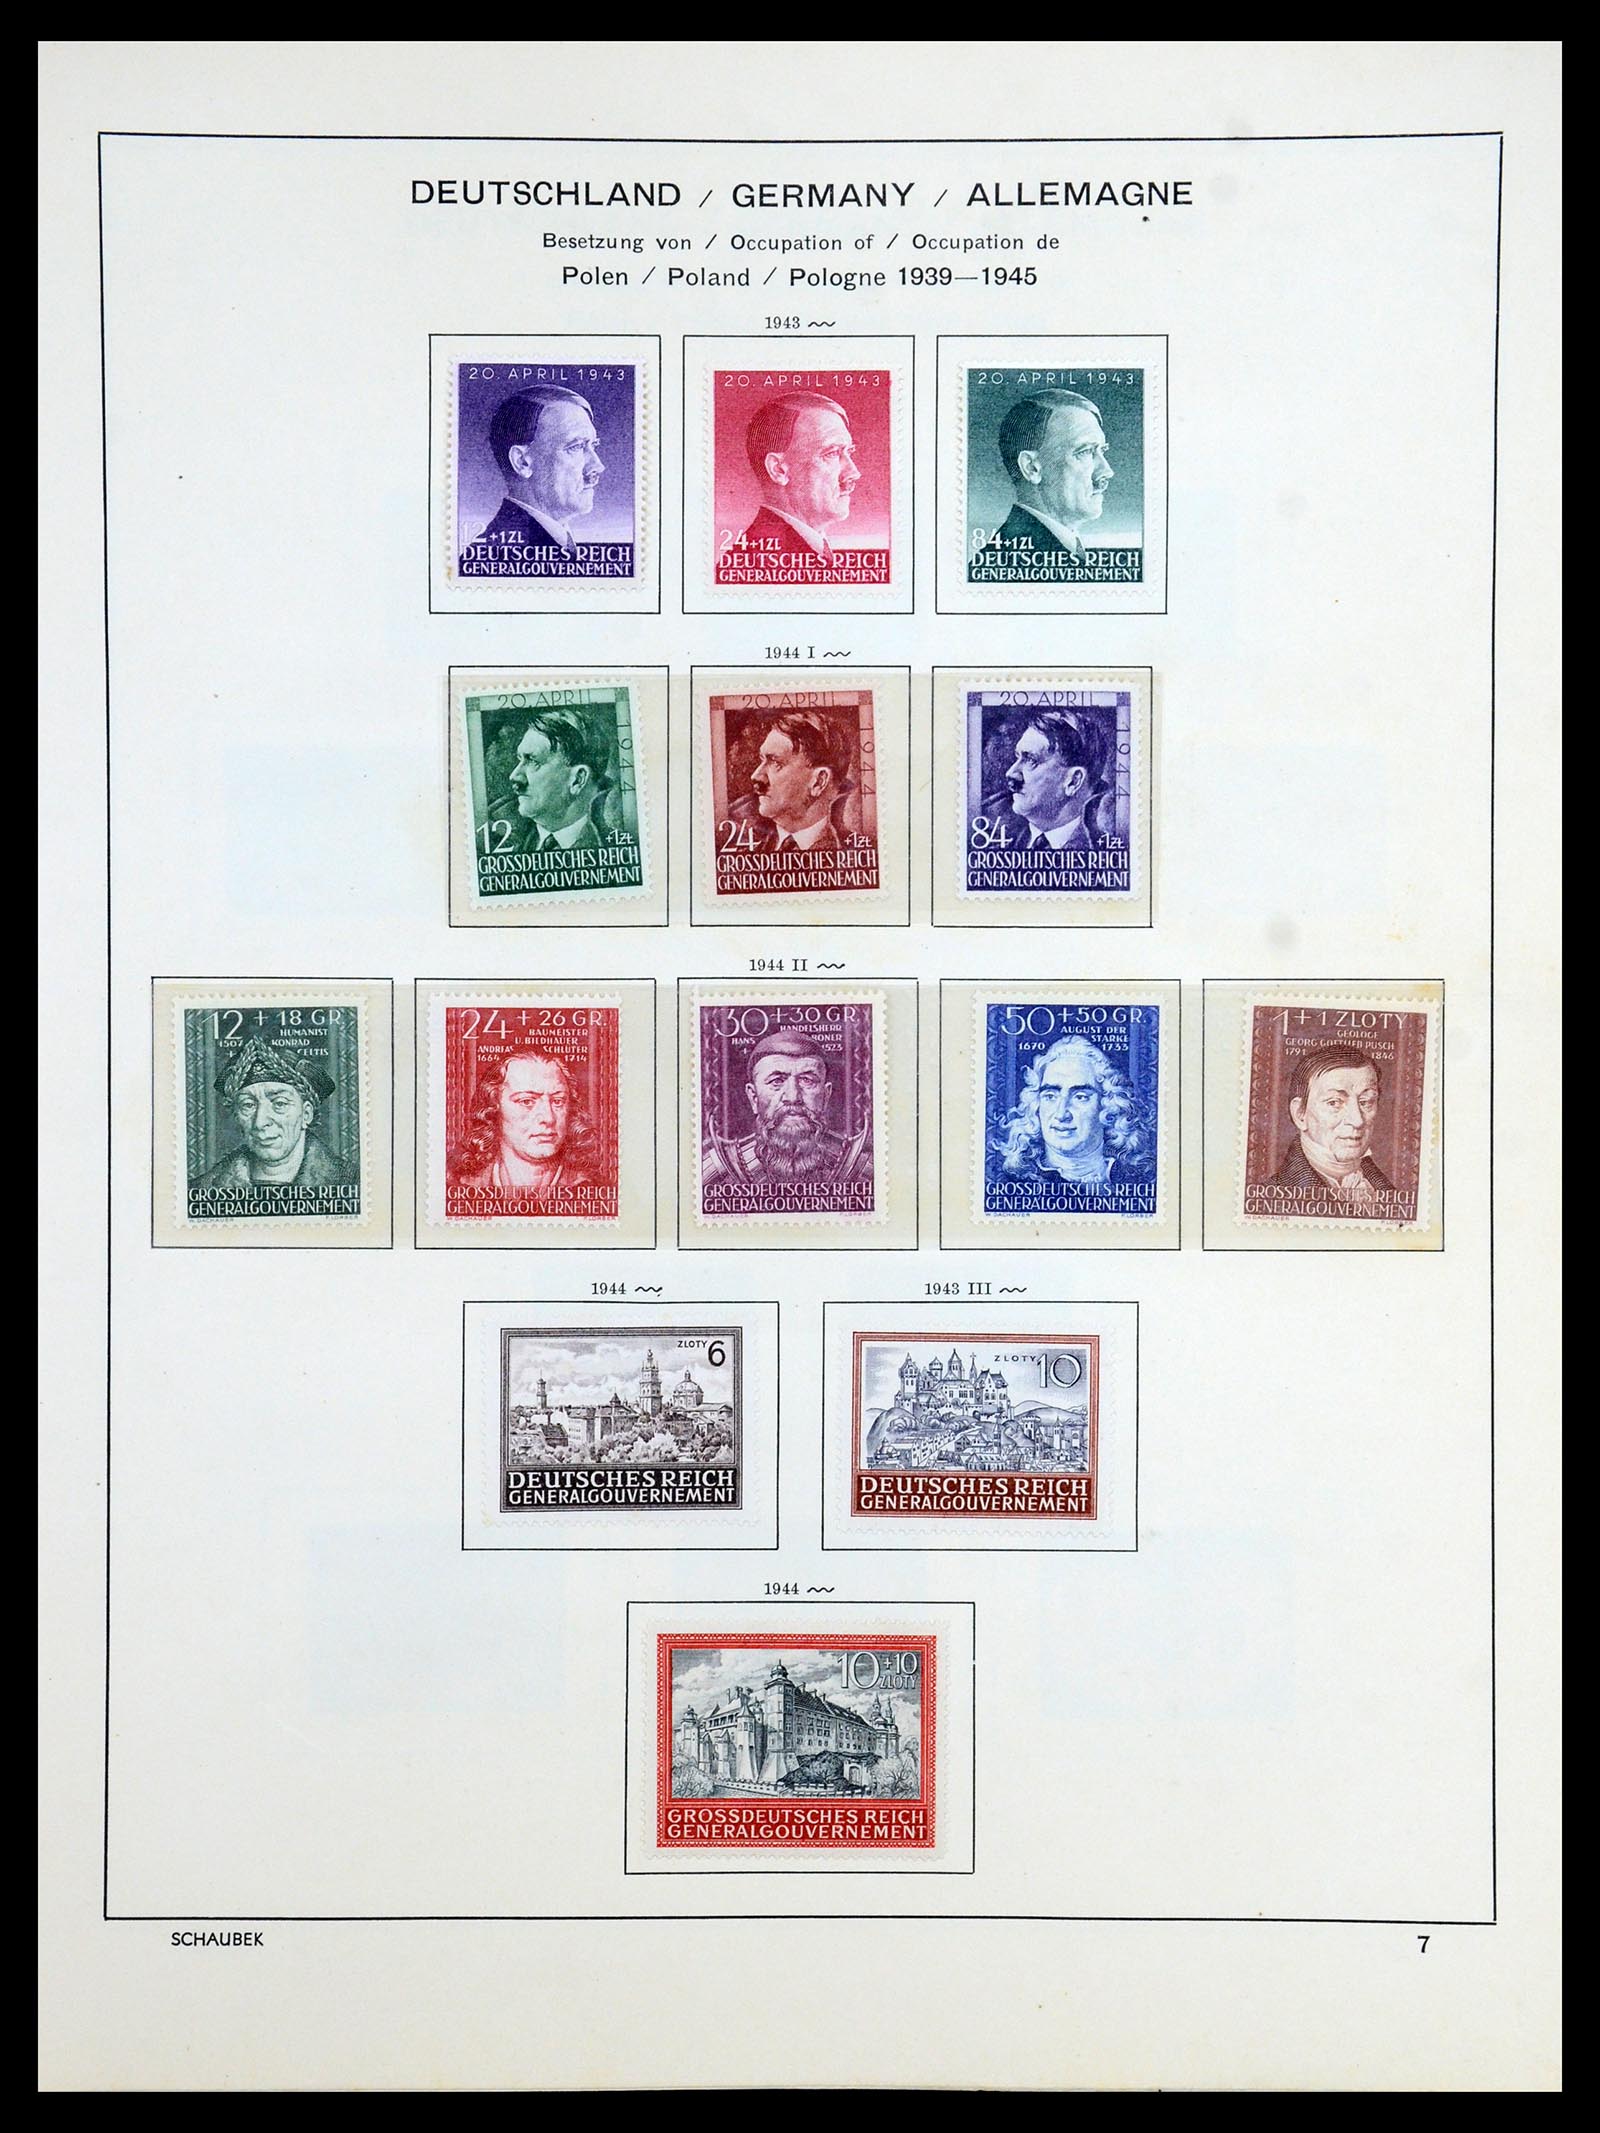 35964 015 - Stamp collection 35964 Germany occupations WW II 1939-1945.